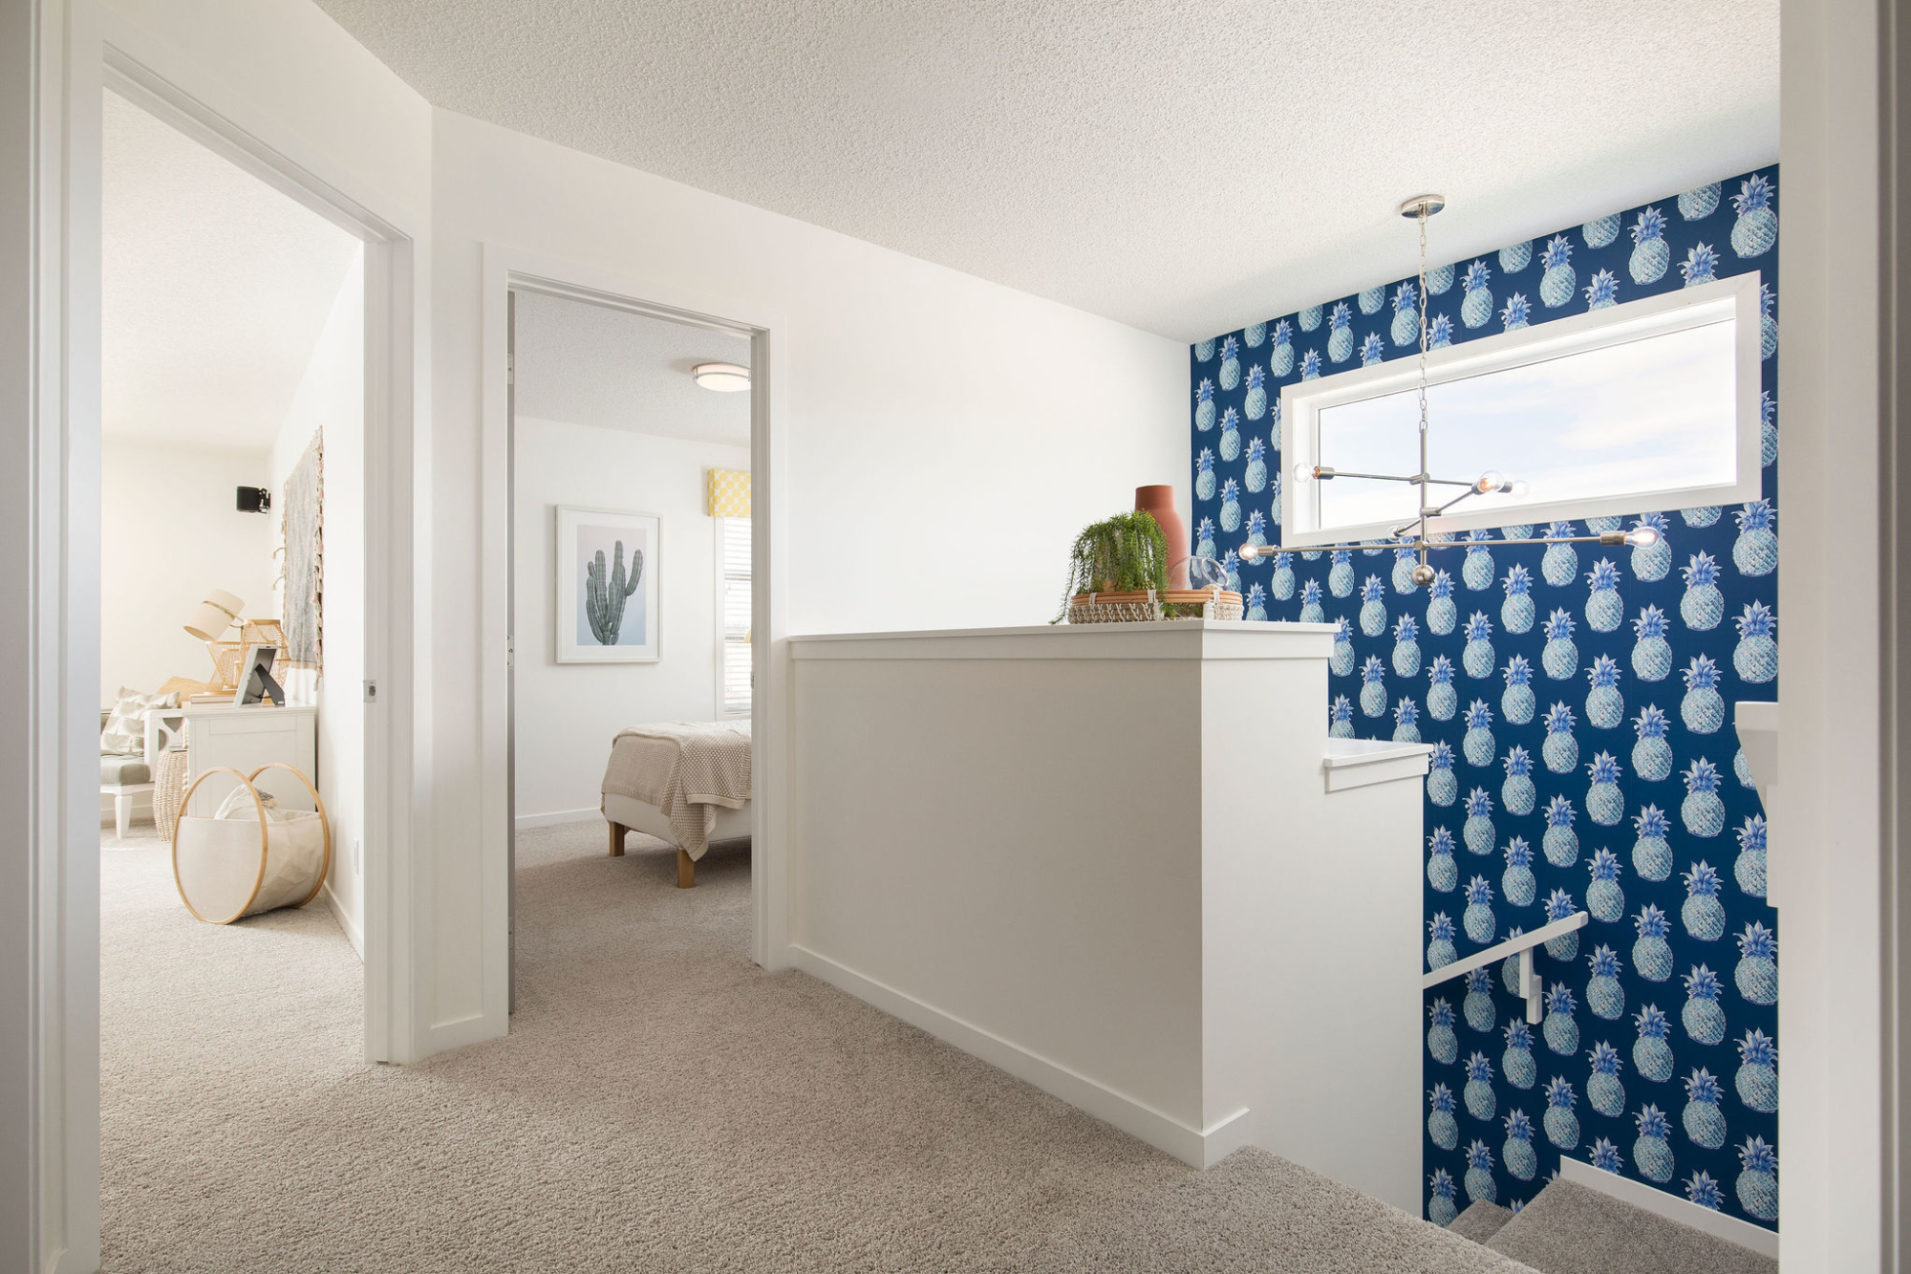 The upstairs landing with 2 bedrooms and pineapple patterned wallpaper.